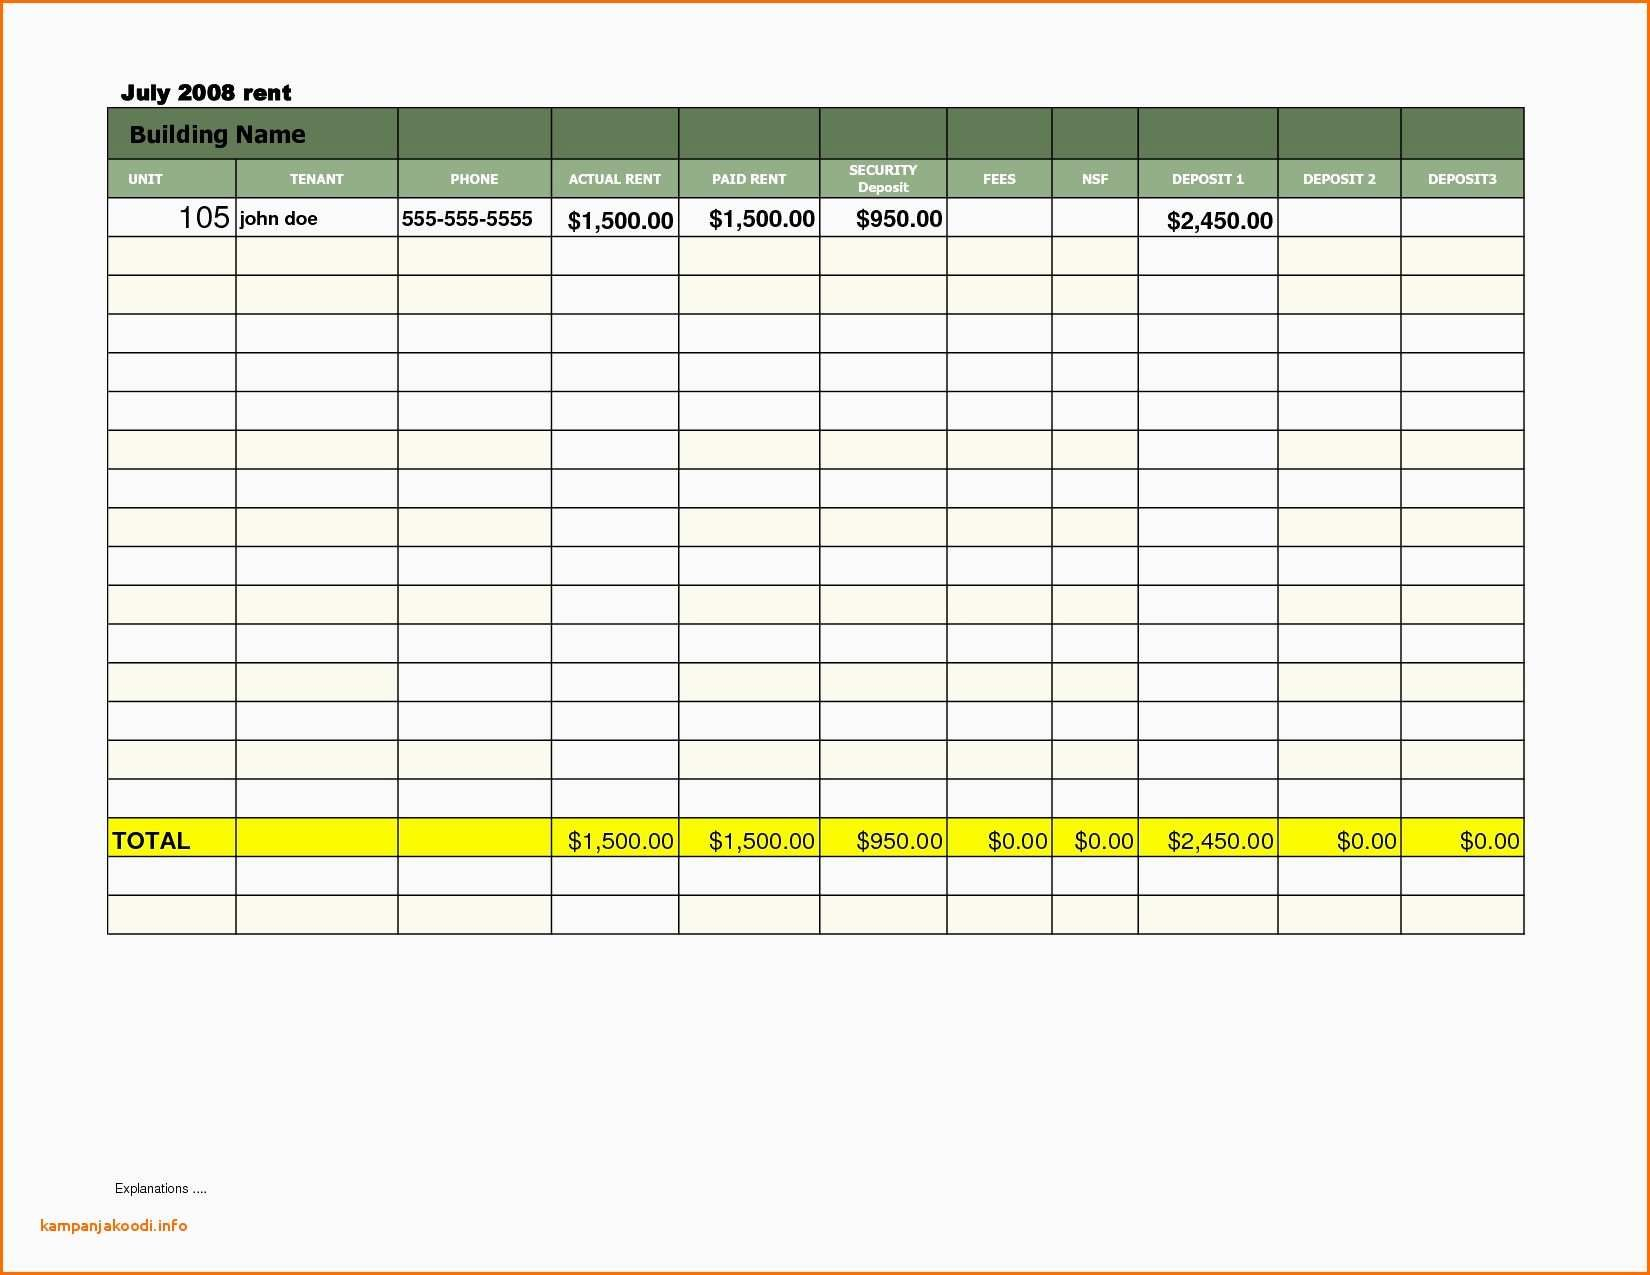 Farm Expense Spreadsheet Excel With Regard To Farm Expense Spreadsheet Awesome Farm Expense Spreadsheet Excel New